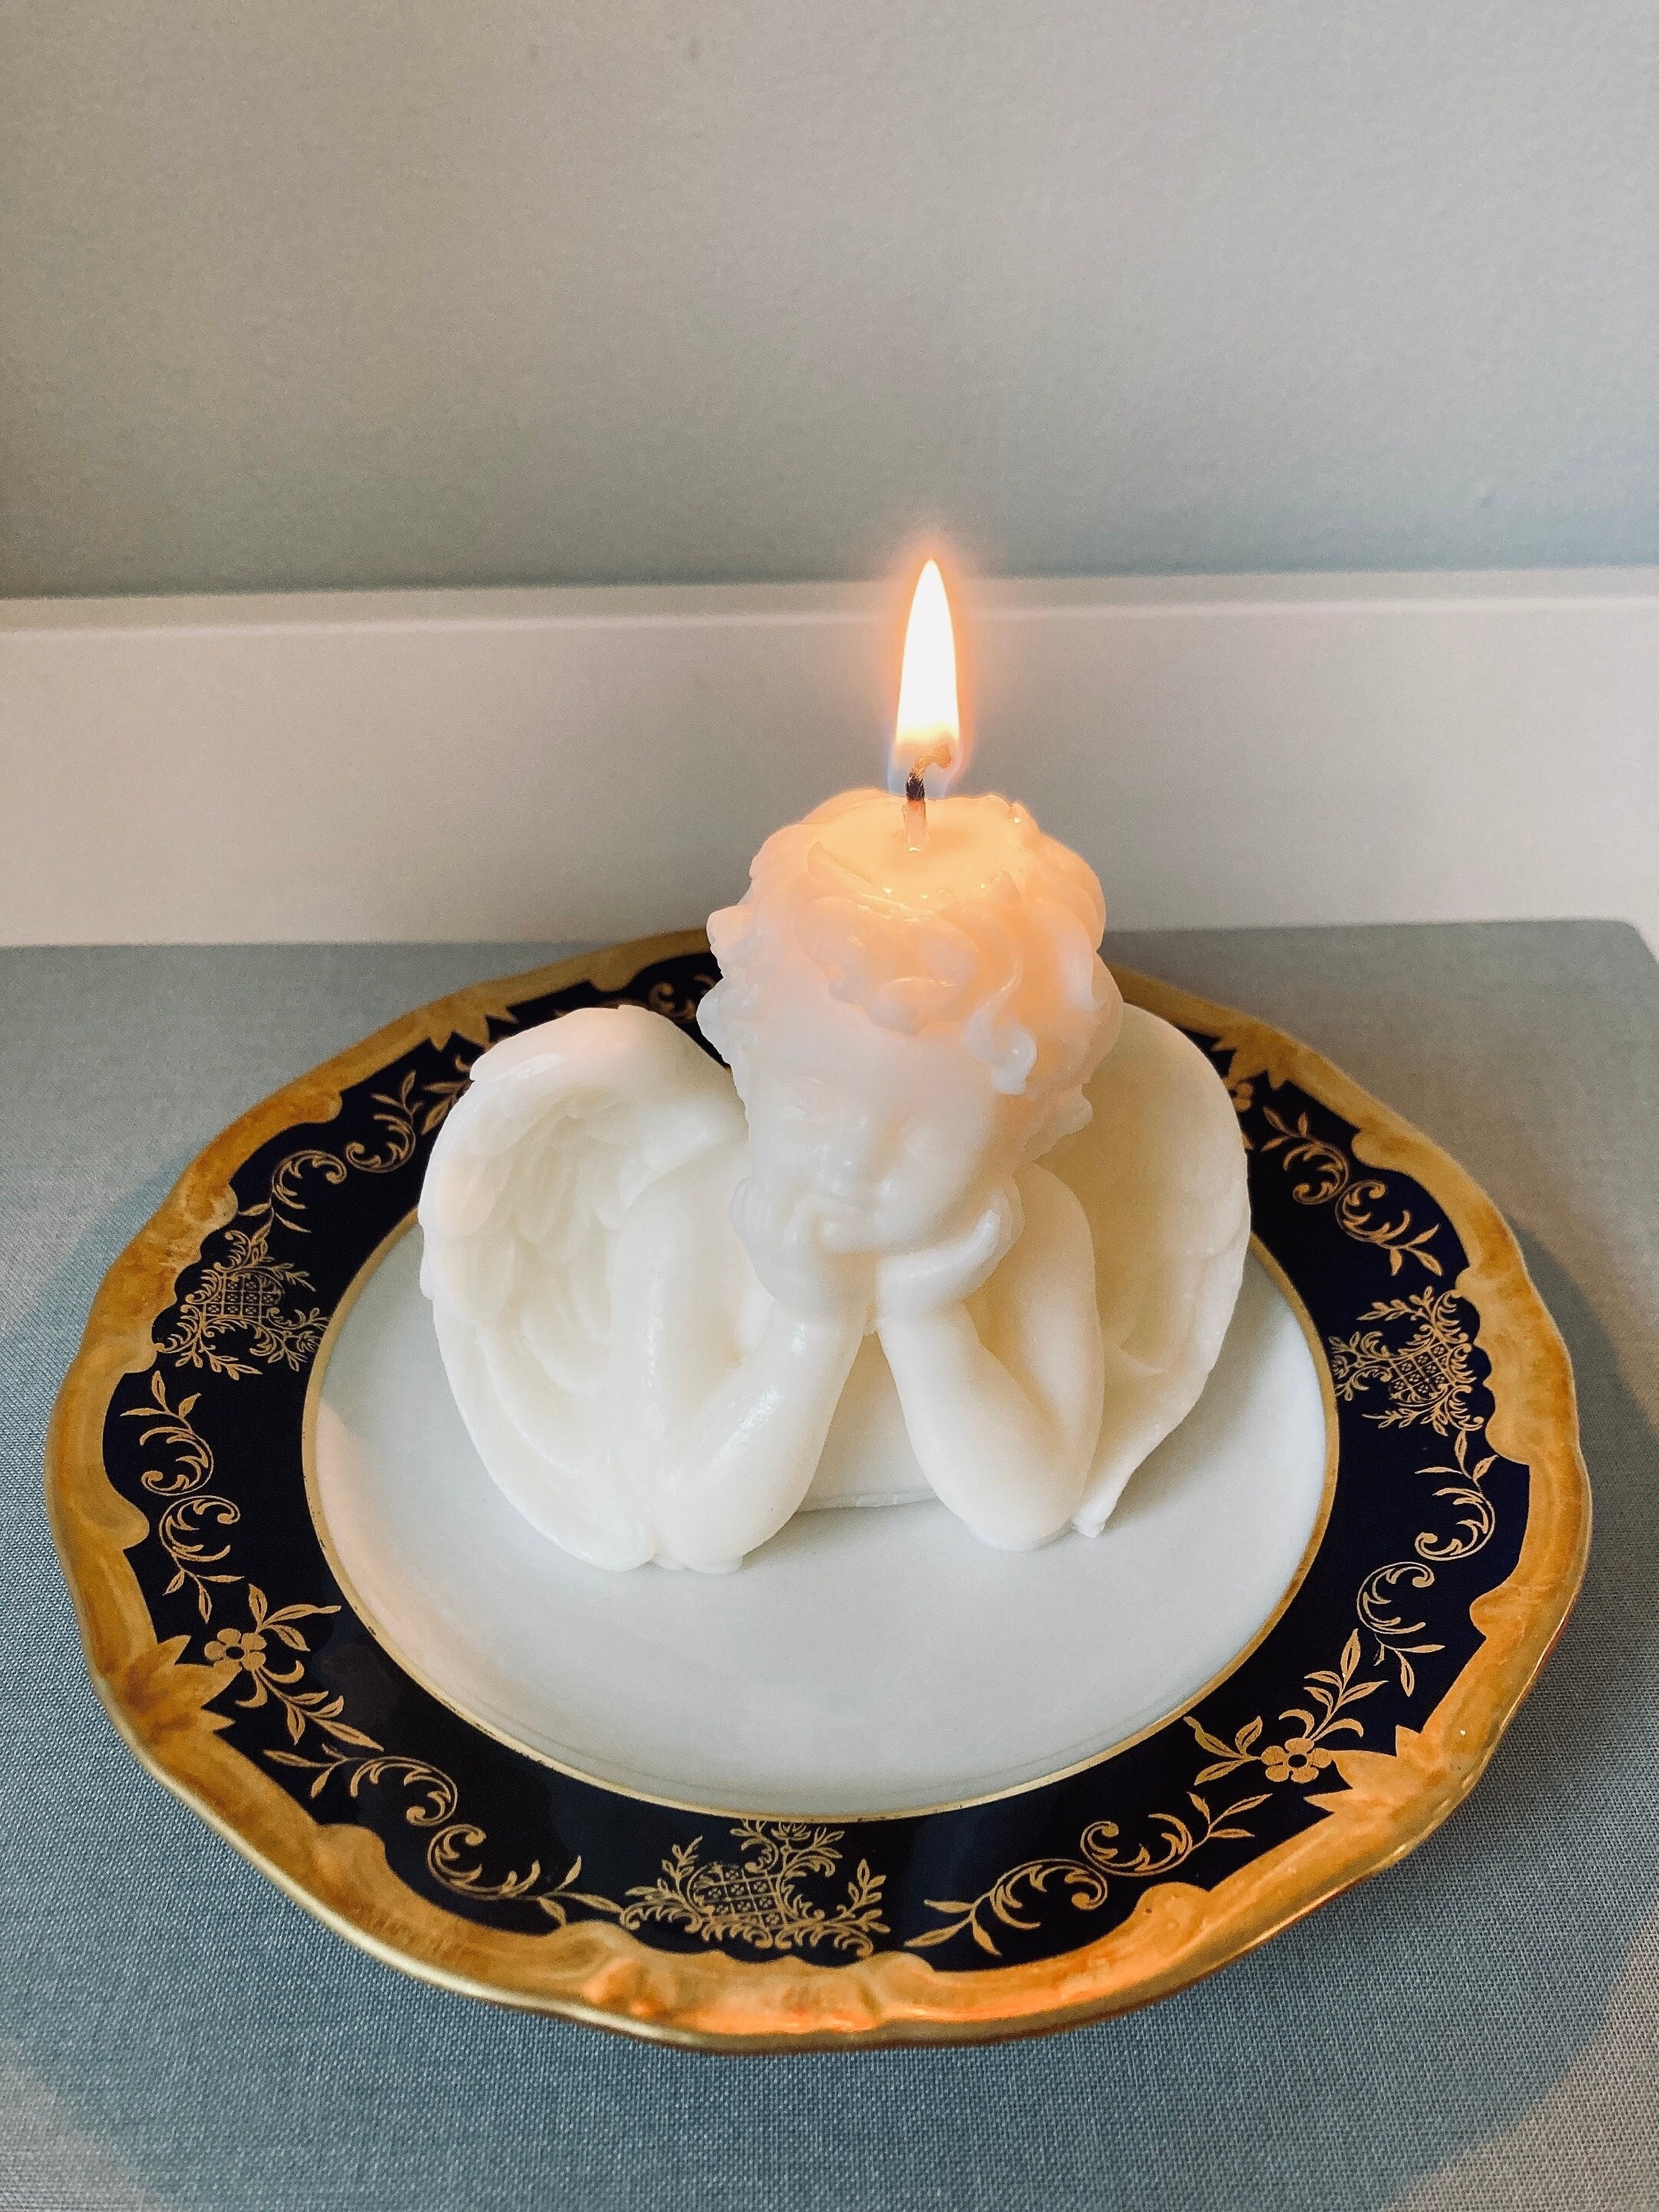 RRD-37 6 Tabbed Candle Wicks (100) 100% cotton for a clean burn, MADE IN  THE USA. 